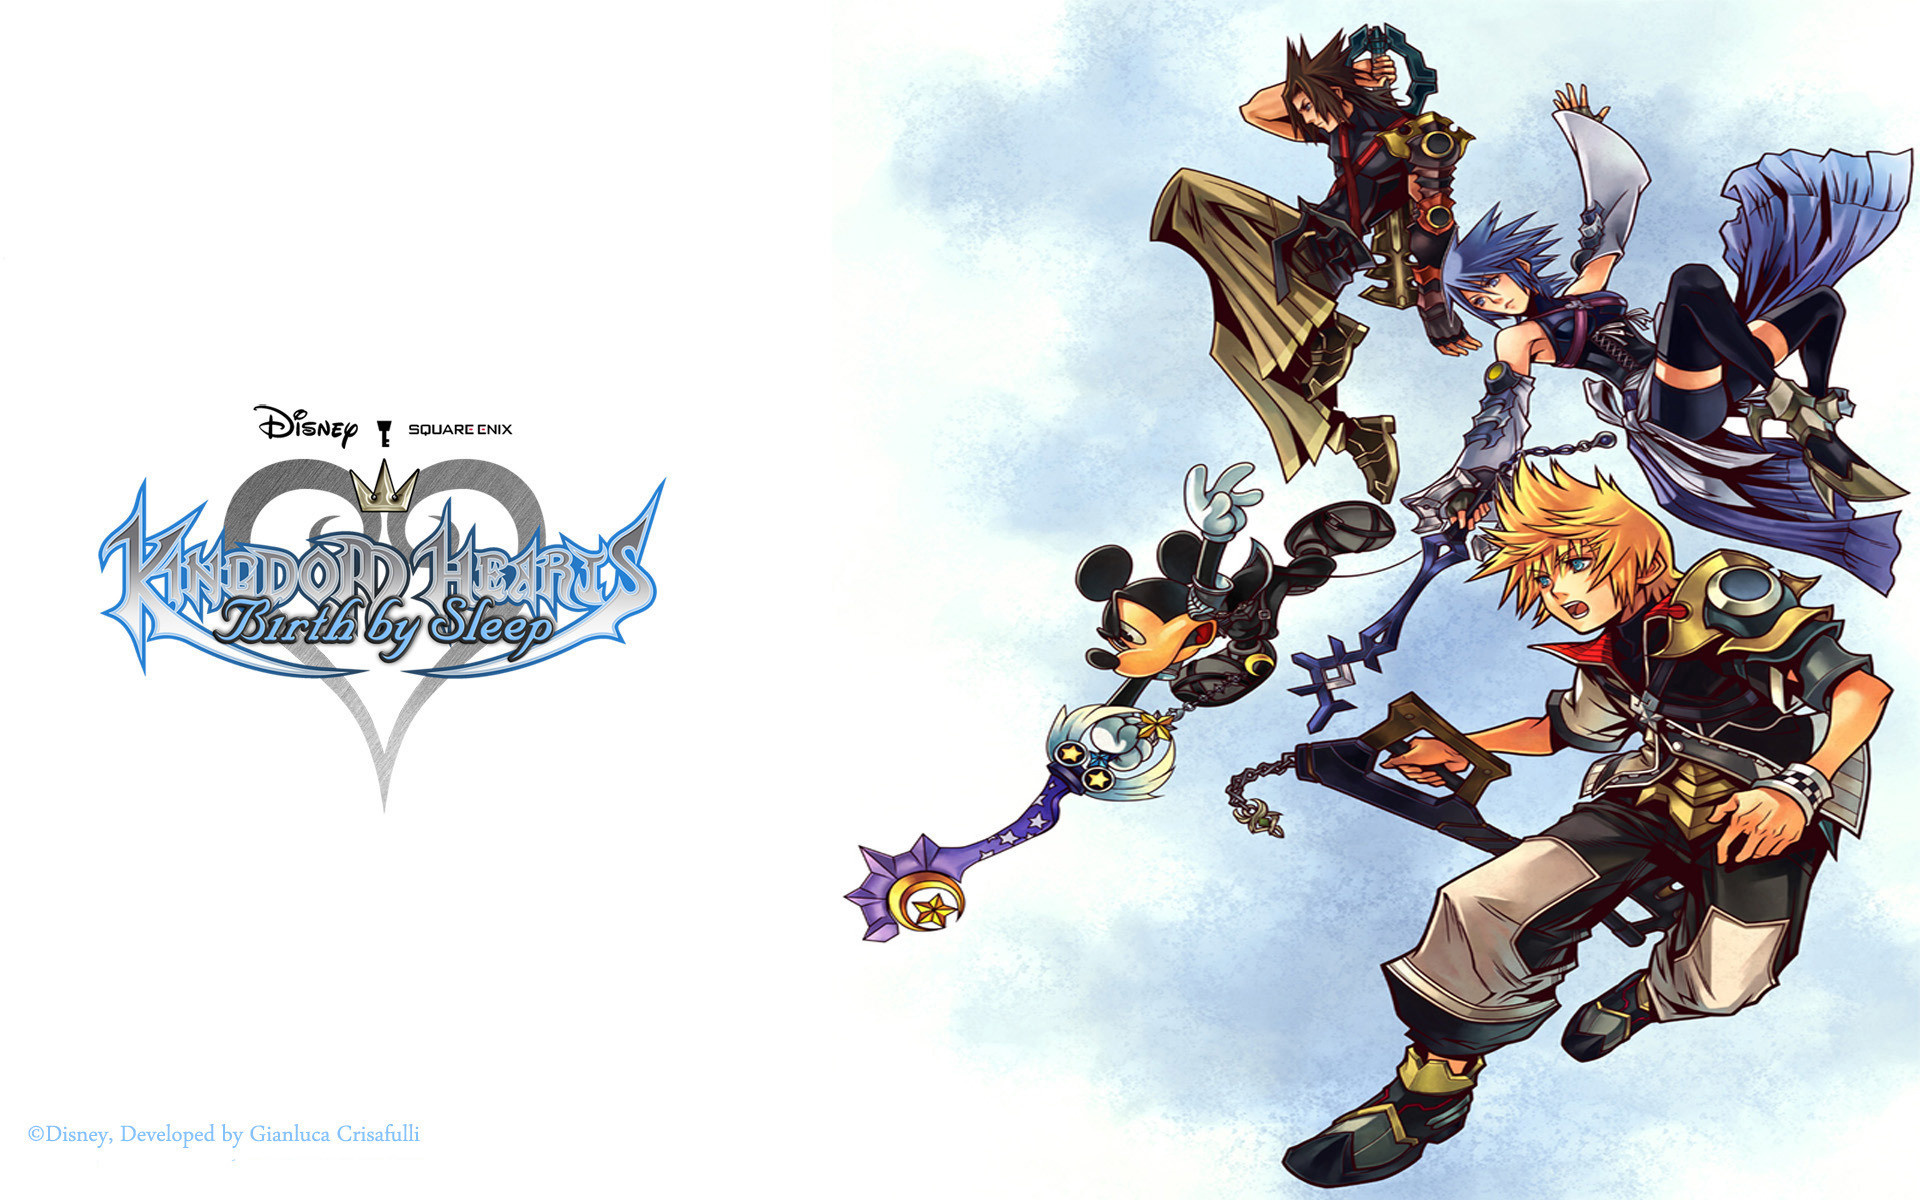 Kingdom Hearts Birth by Sleep, Captivating wallpapers, Magical landscapes, Iconic characters, 1920x1200 HD Desktop